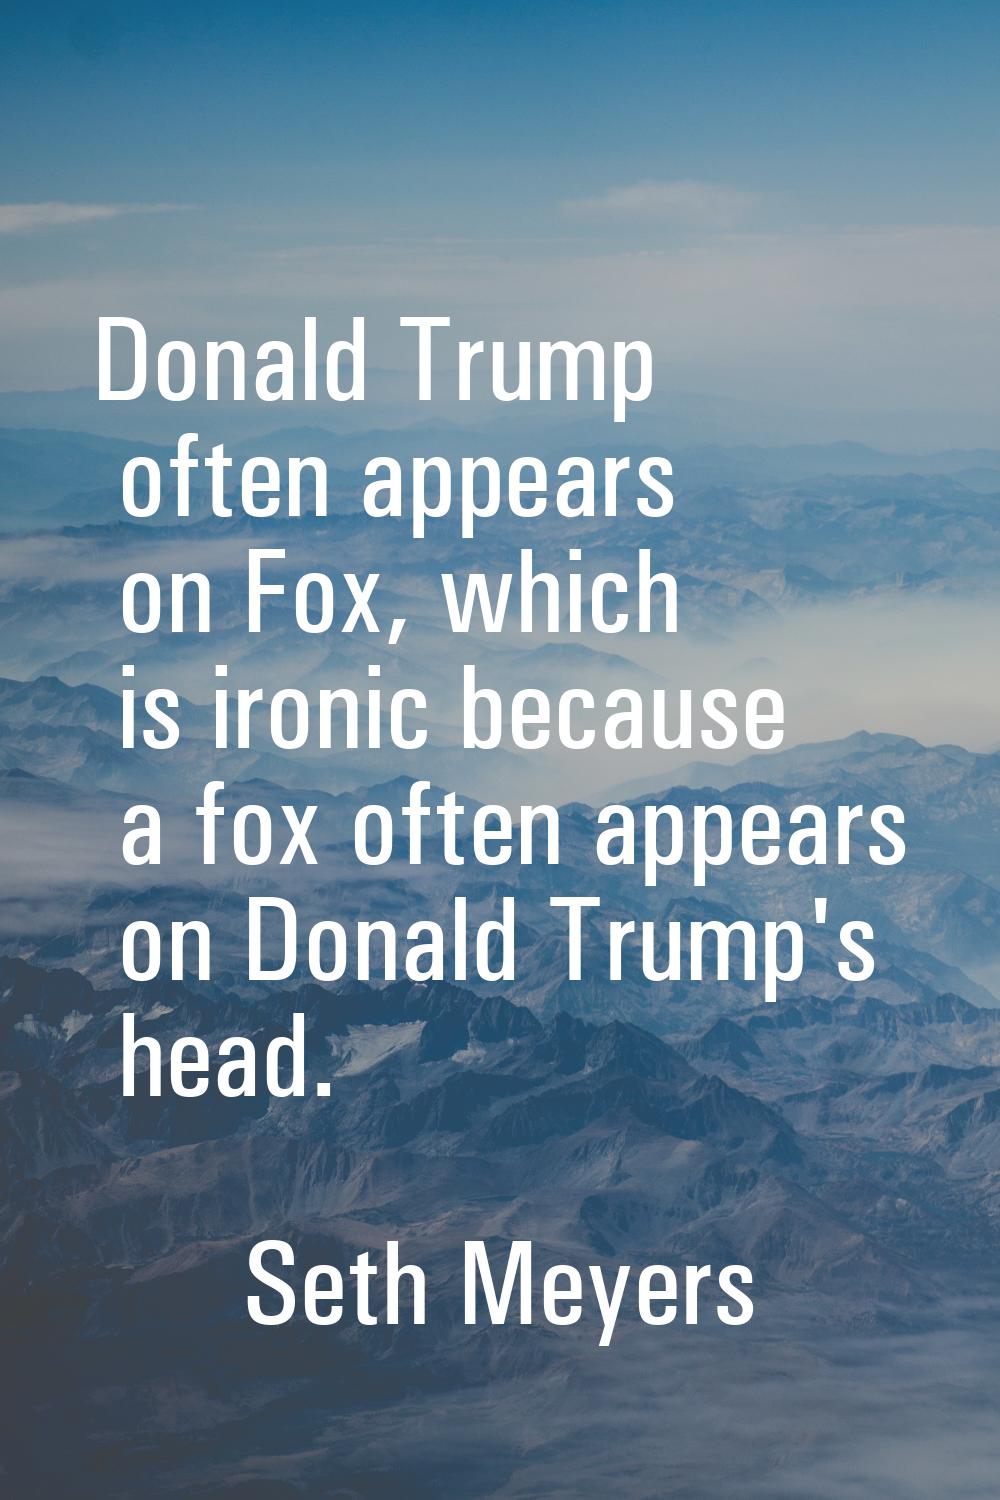 Donald Trump often appears on Fox, which is ironic because a fox often appears on Donald Trump's he